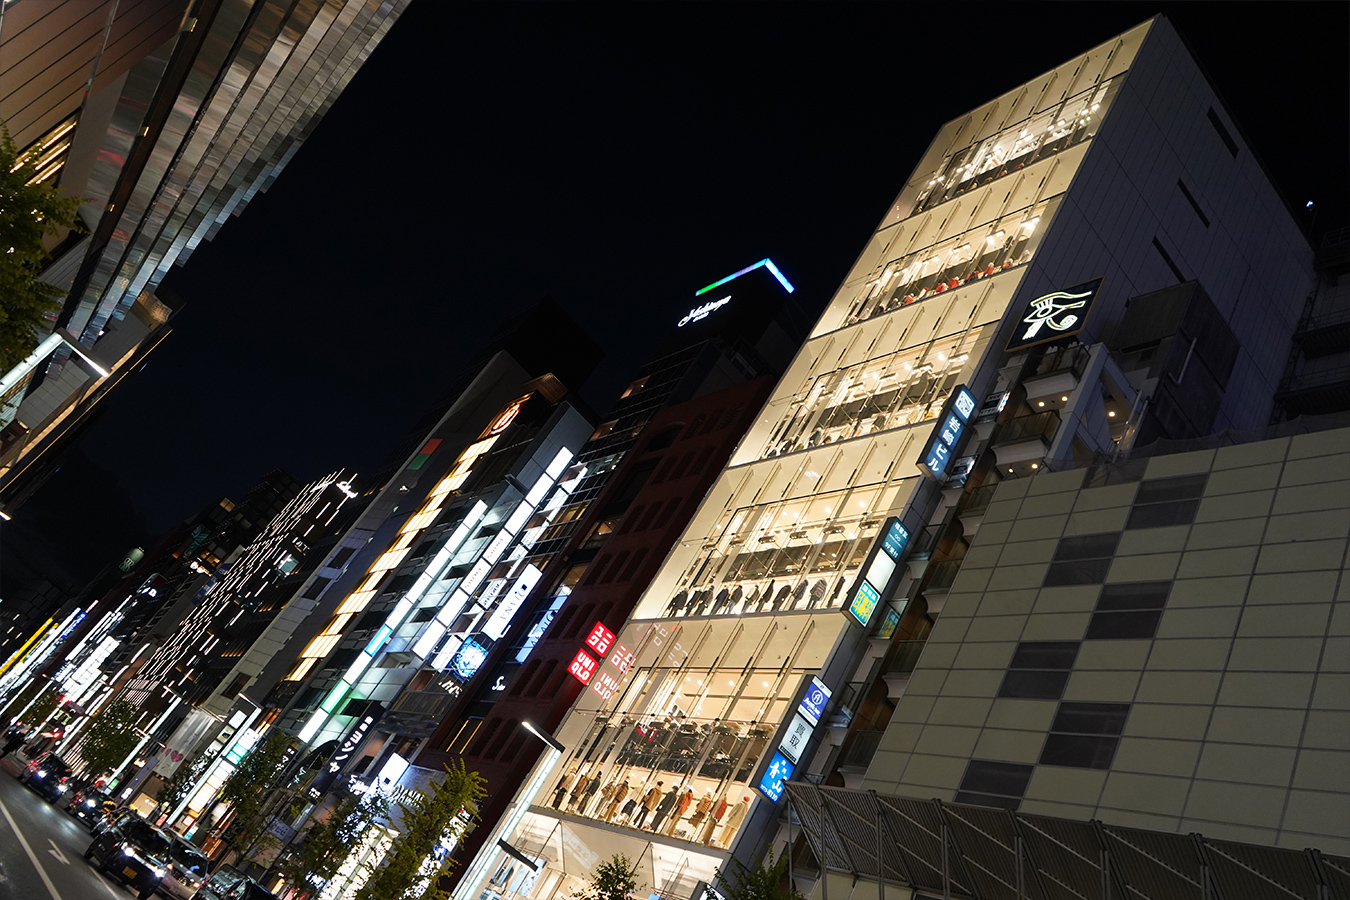 An avant-garde source of fashionable goods “Ginza’s fashion center